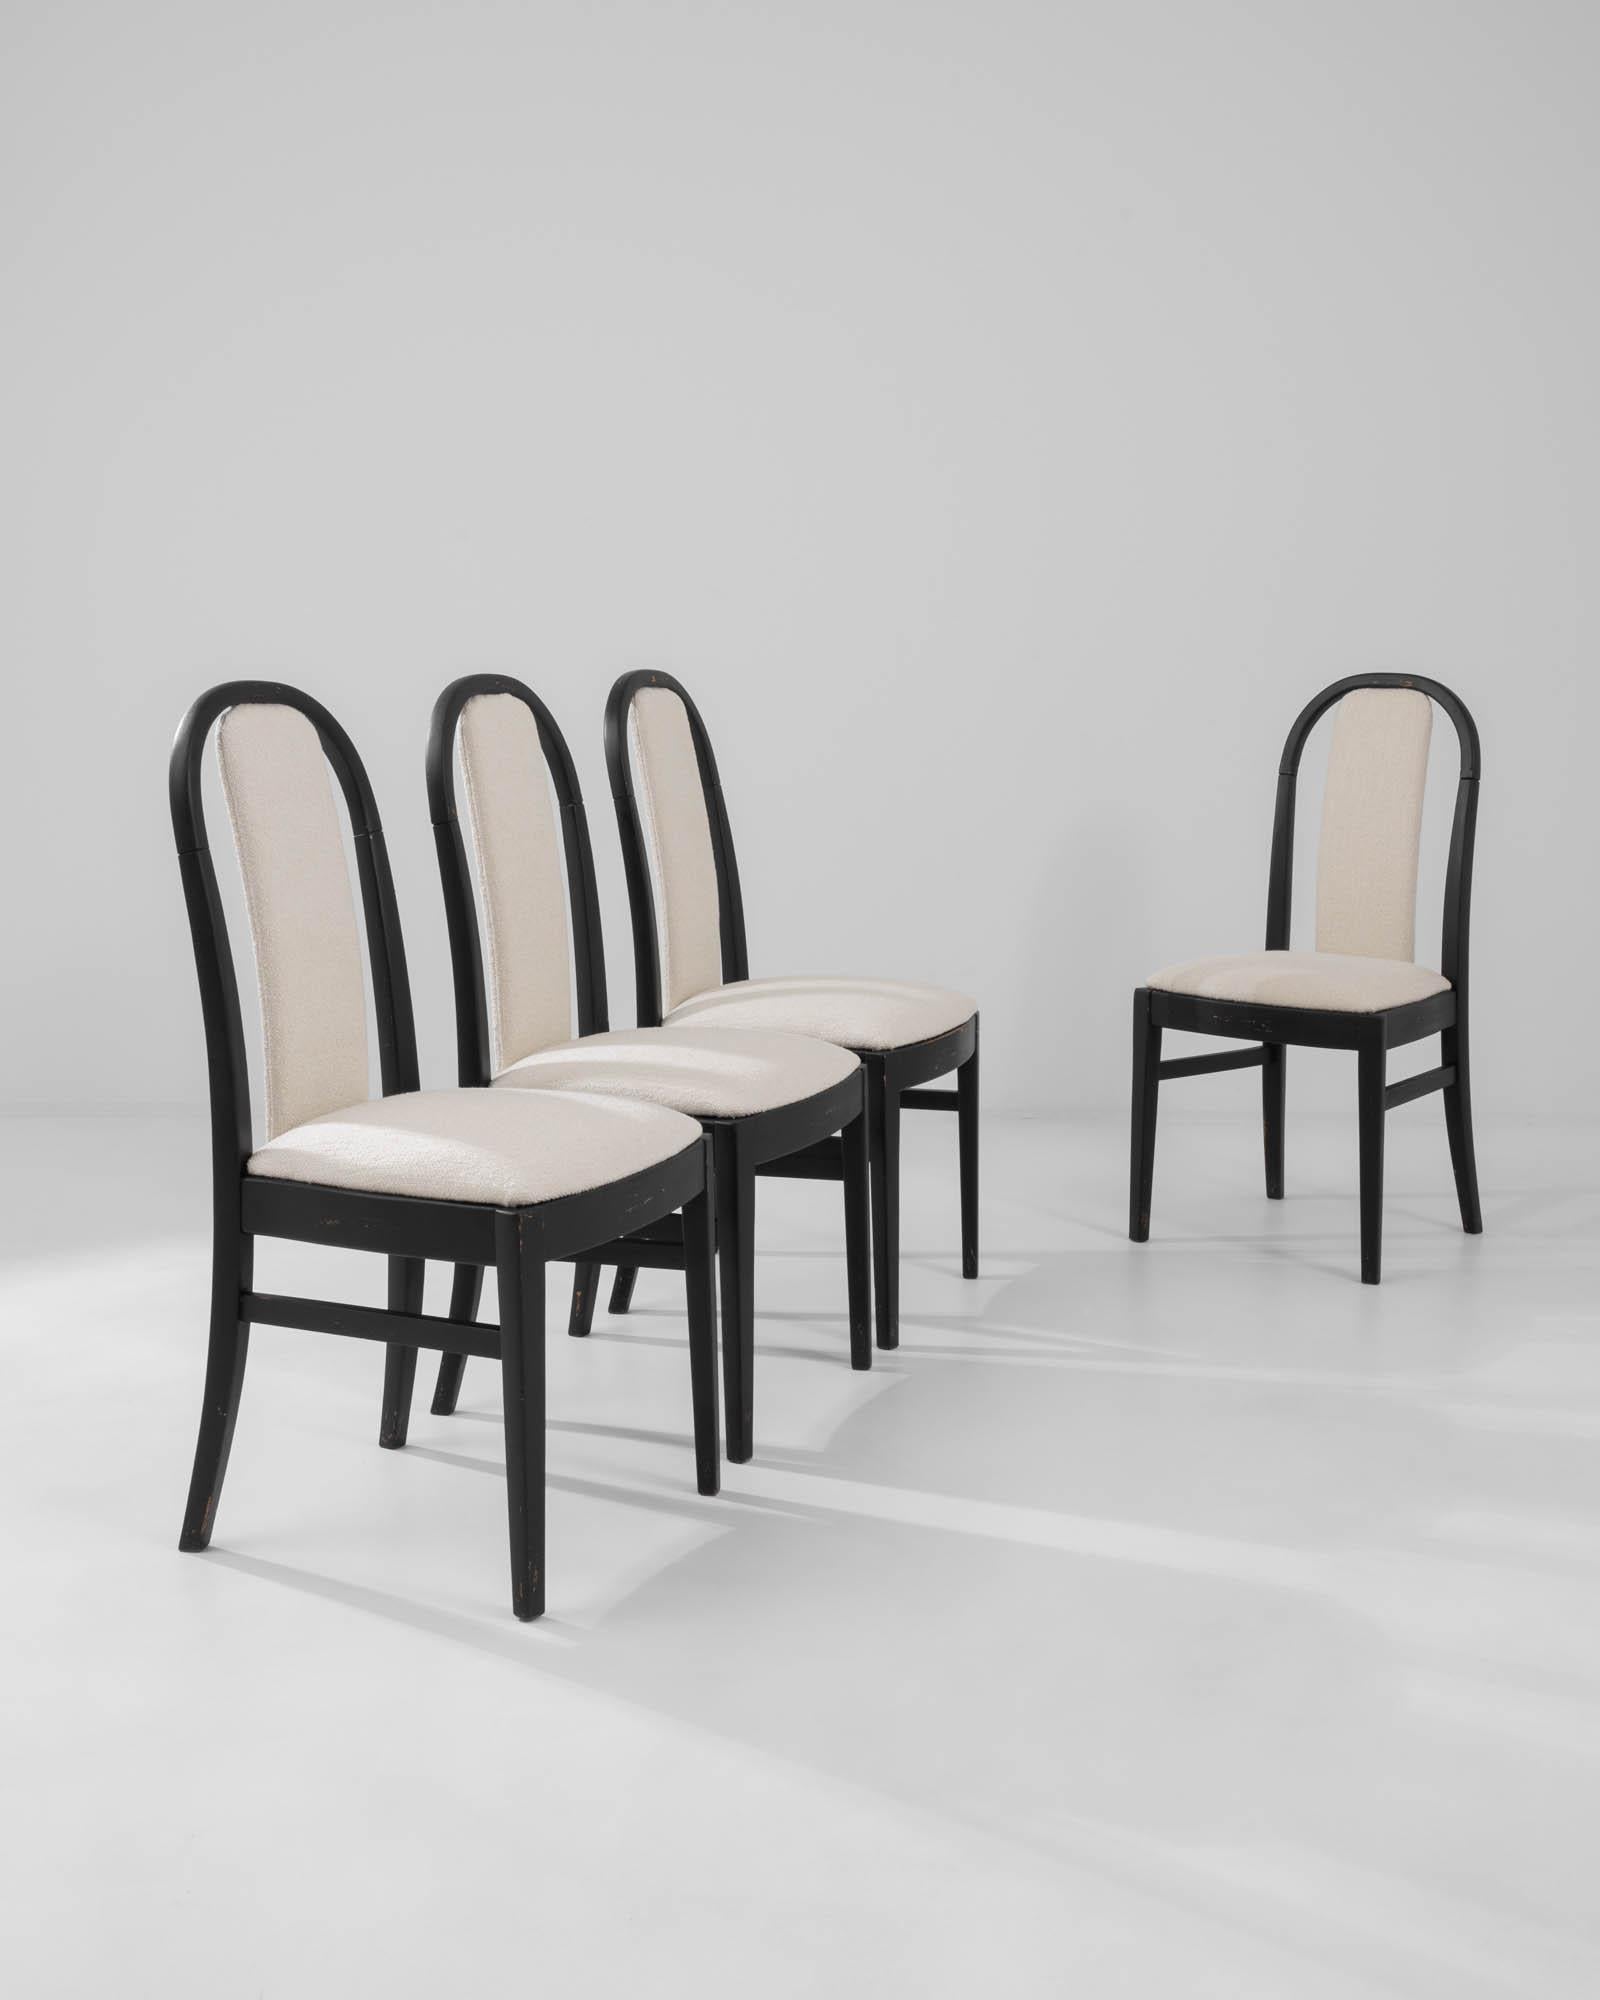 Impeccably stylish, this set of four wooden dining chairs make a sophisticated addition to intimate soirees and elegant gatherings. Built in France in the 20th century, the design has a Modernist simplicity. The clean curve of the backrest is